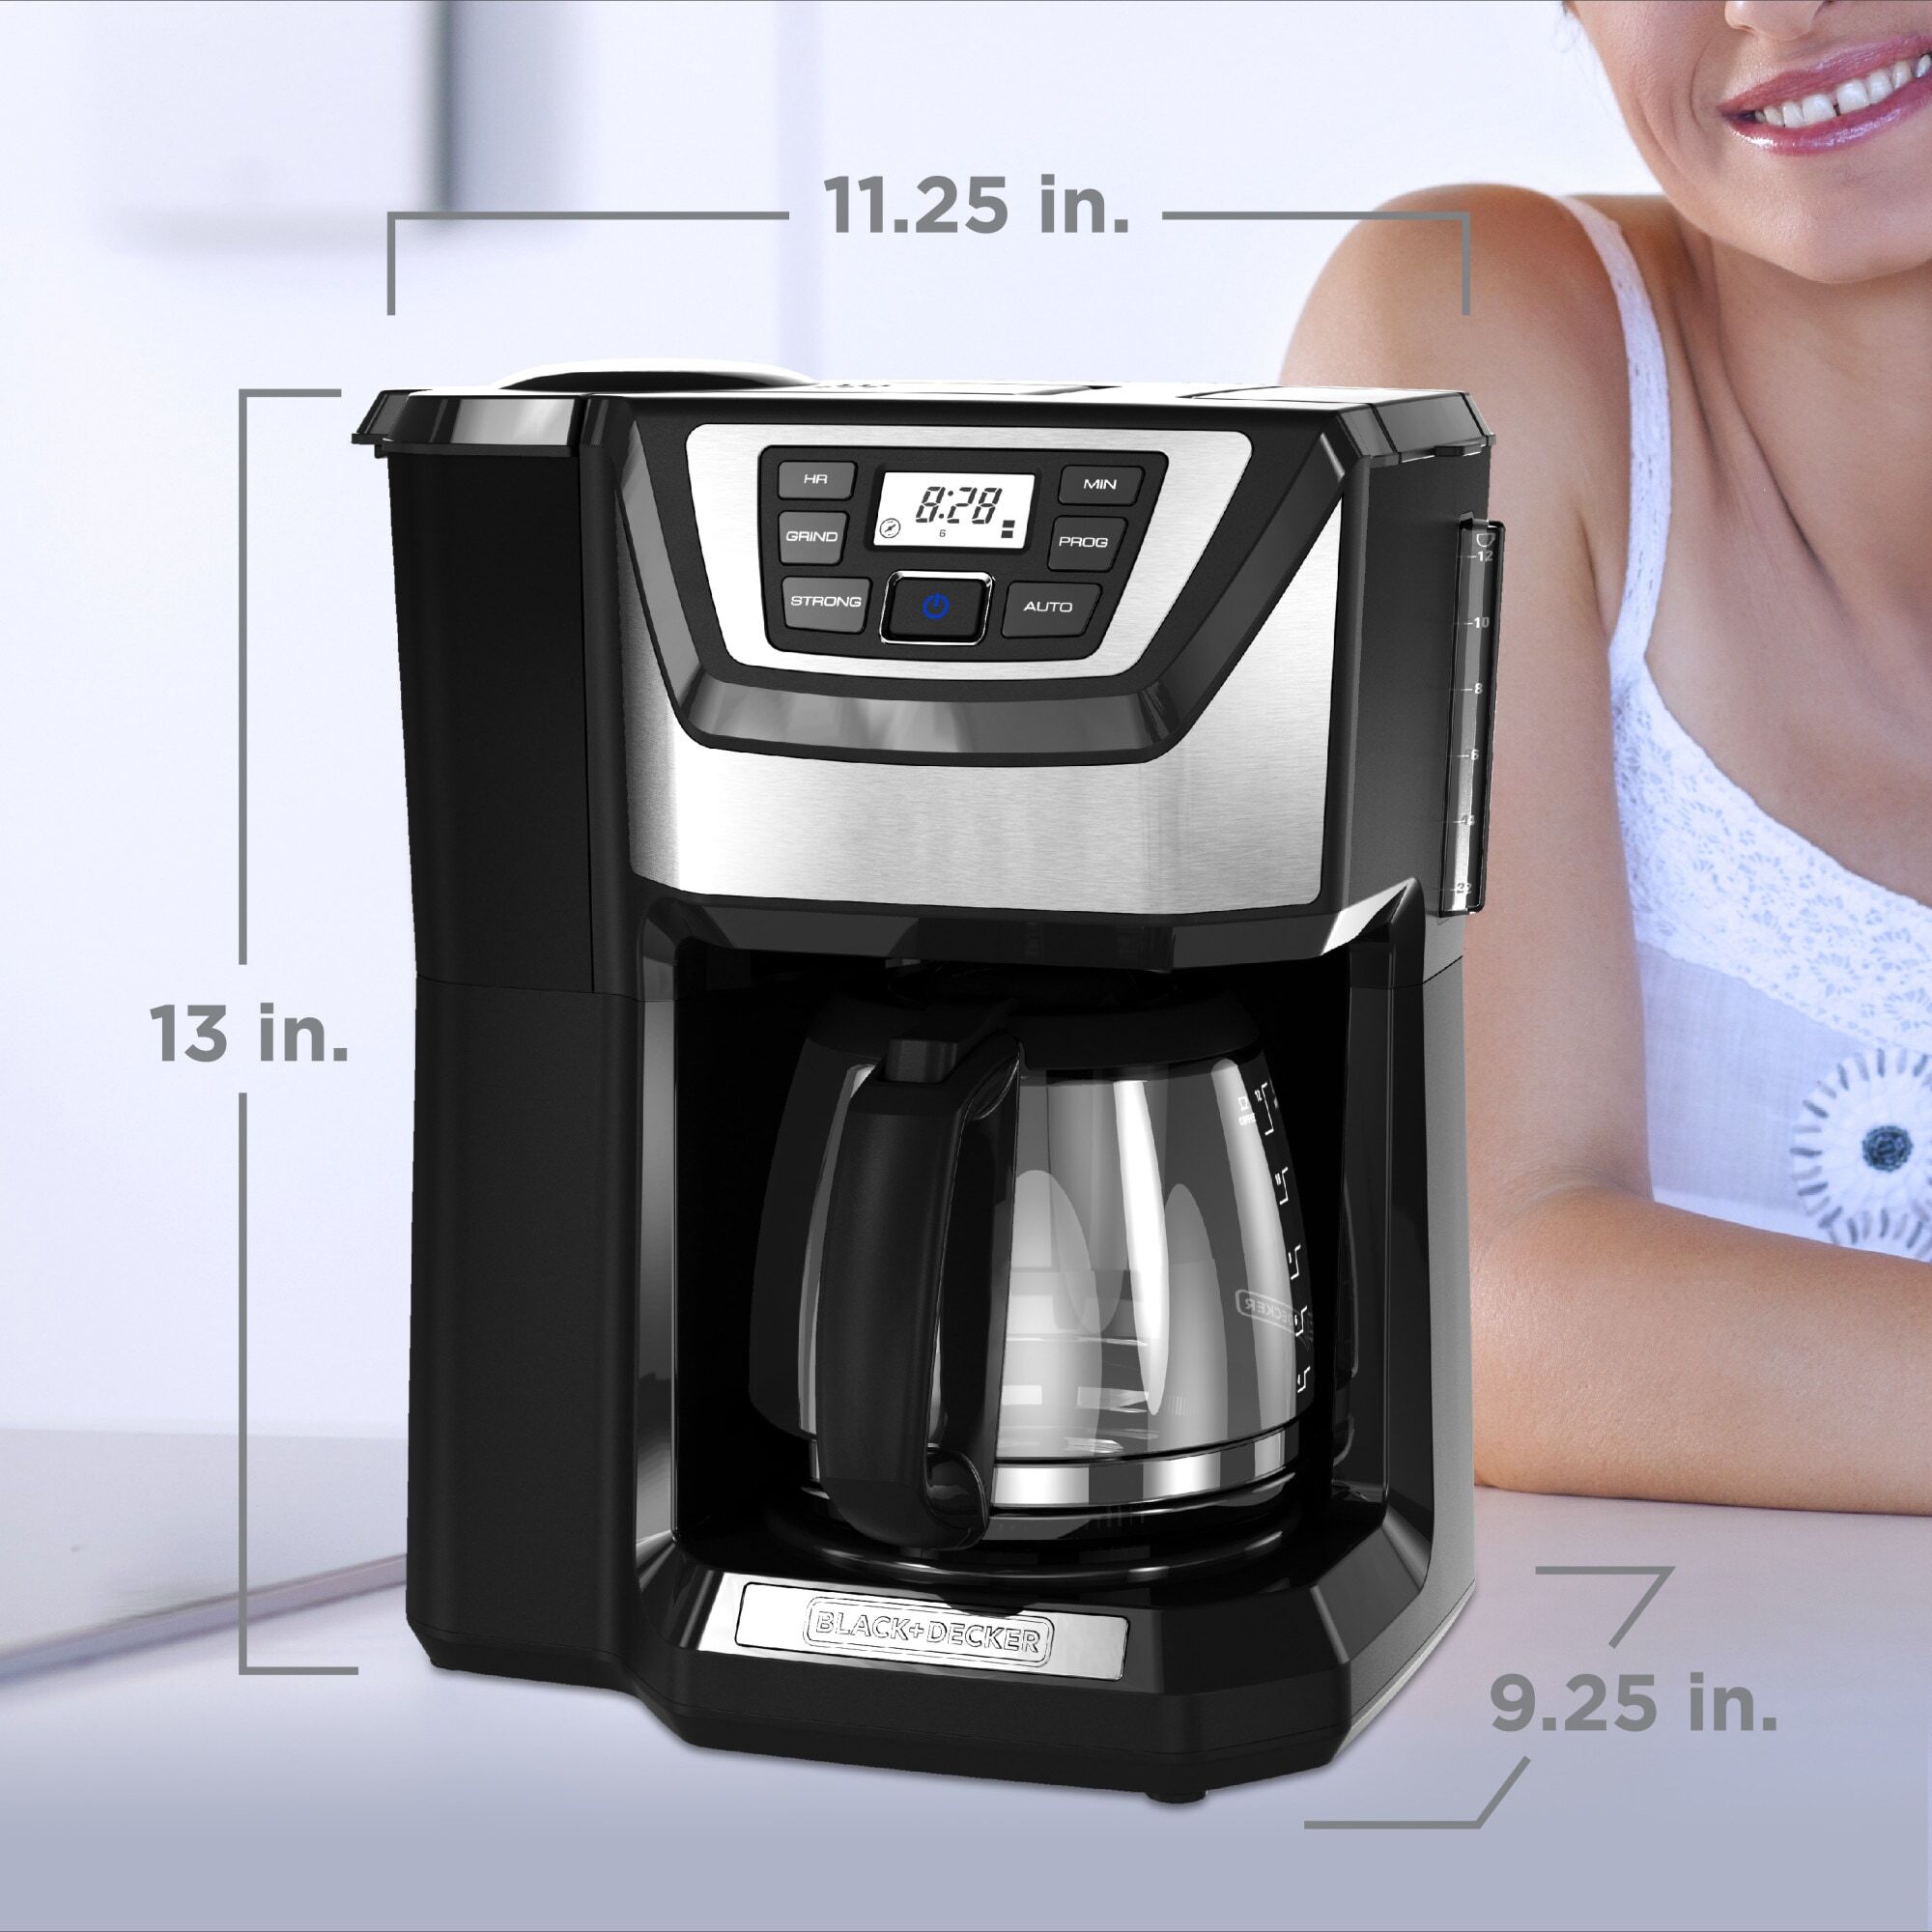 Woman smiling next to coffee maker which is on a counter